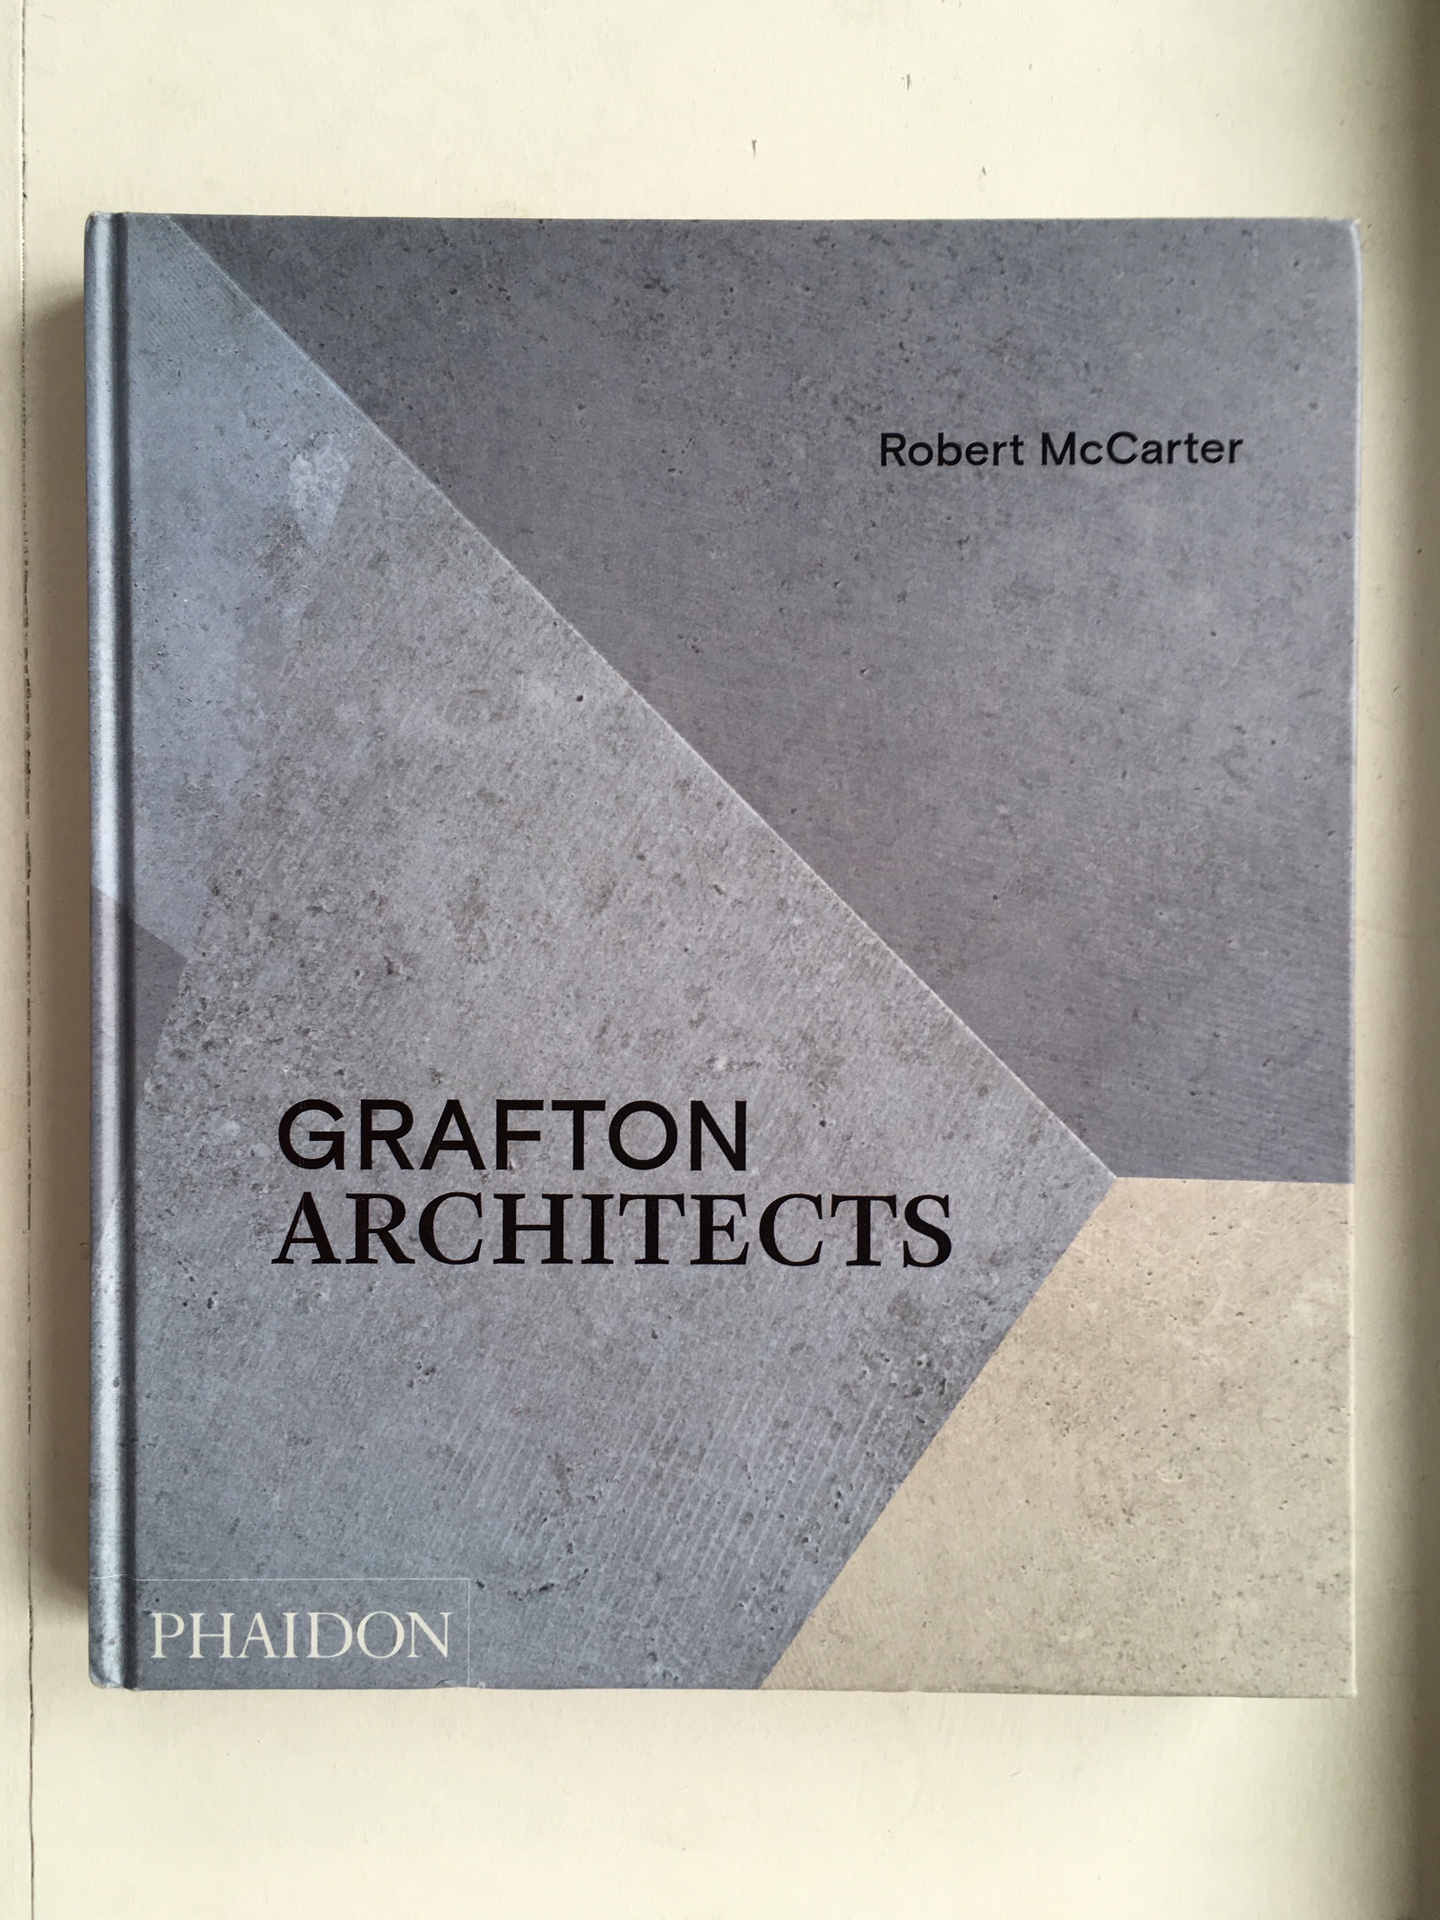 Cover of Grafton Architects, featuring three trapezoids—two in shades of gray, one more of a cream color.